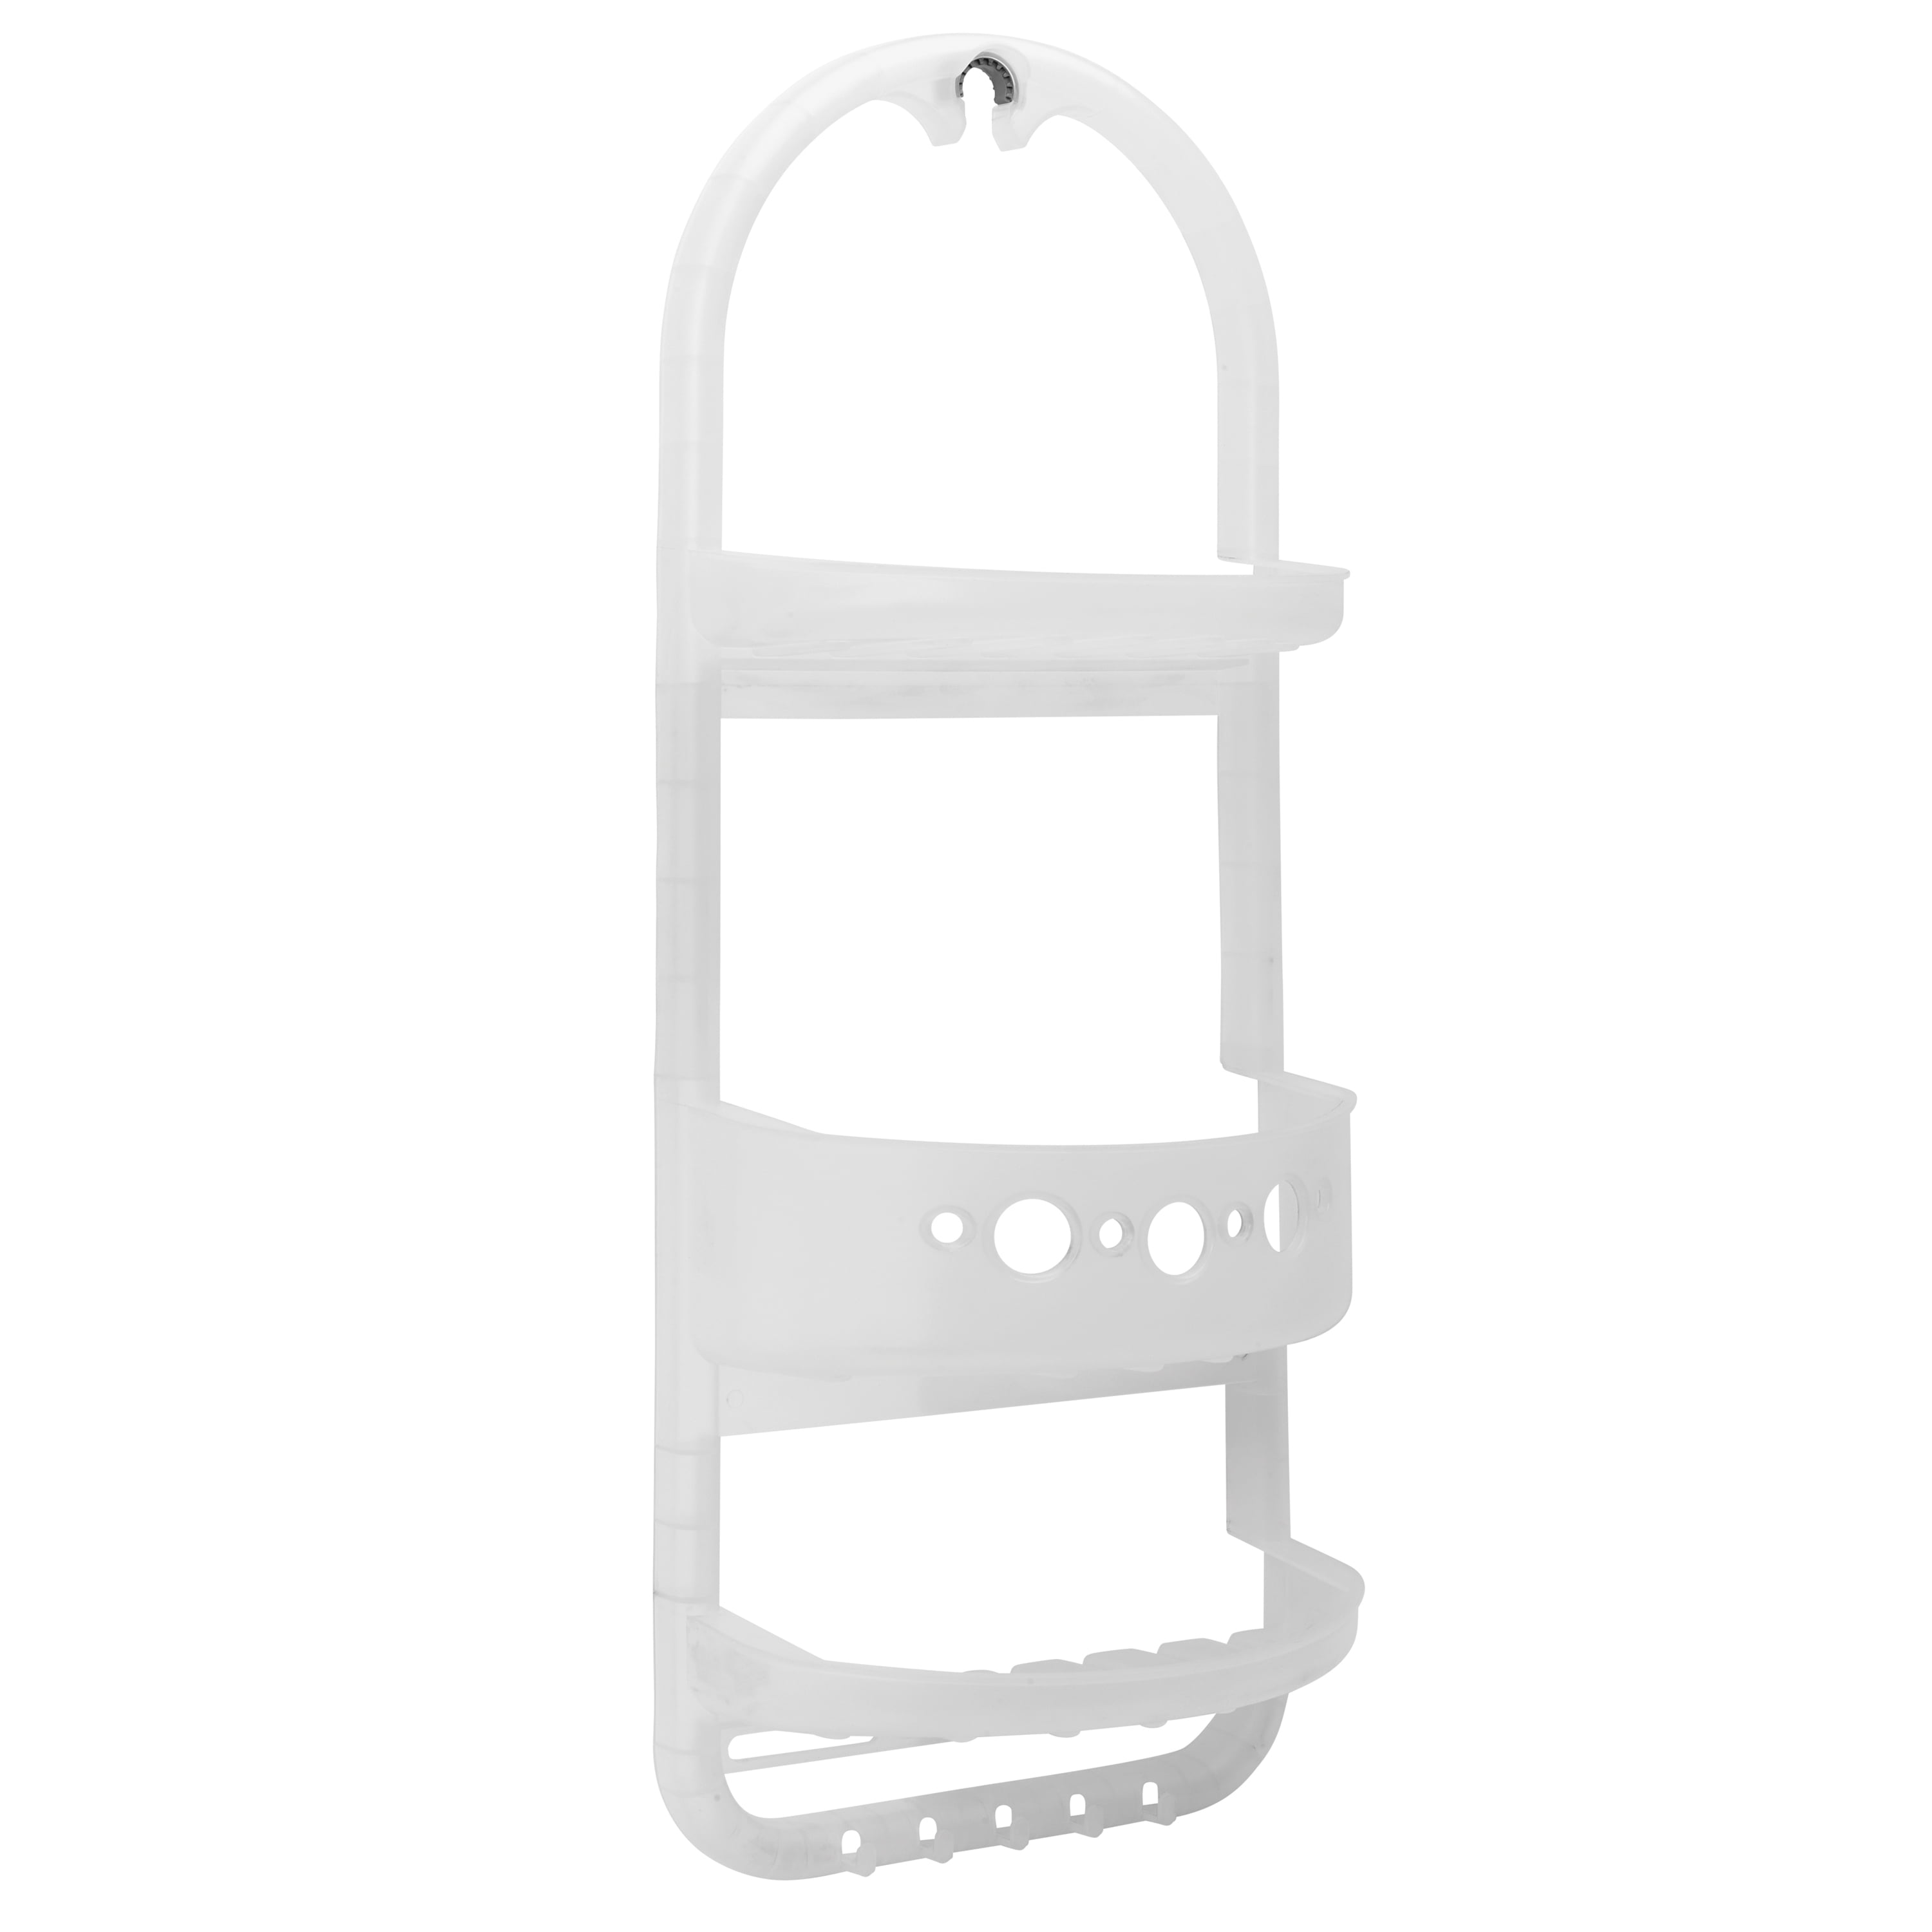 ISMART CADDY WITH HANGER-Fit to 12 under any bucket